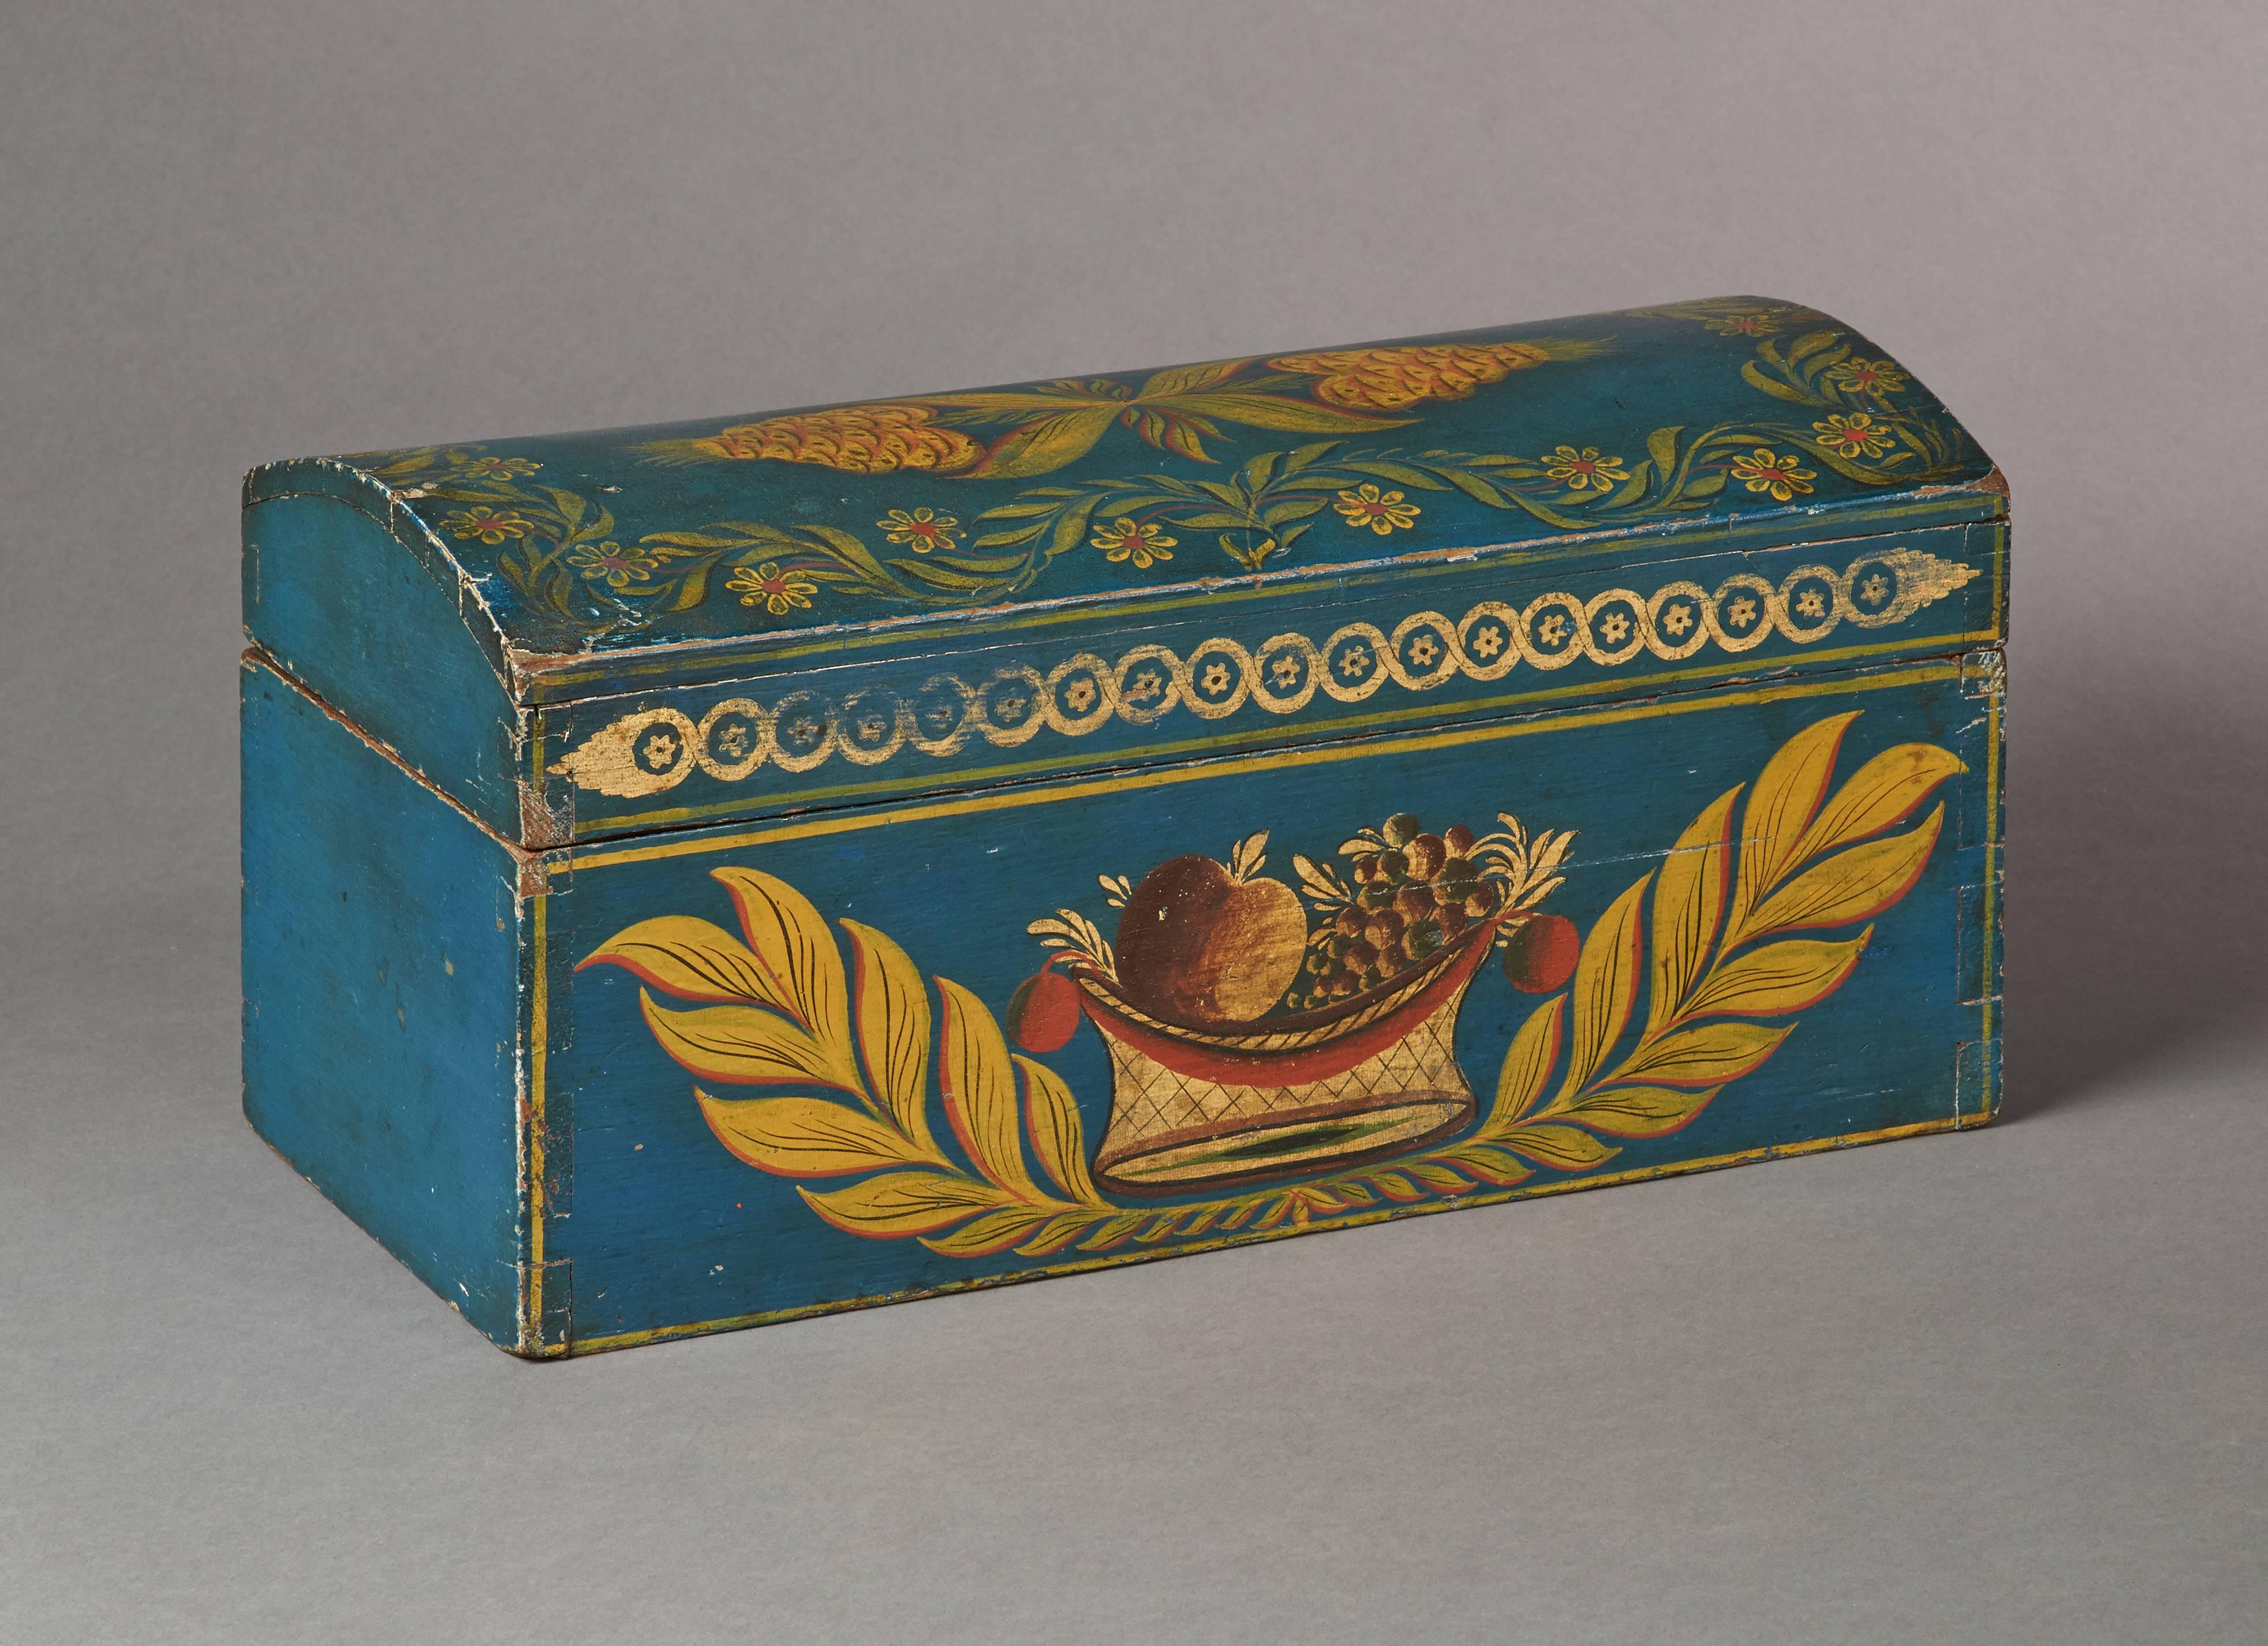 An exceptional New York state dome-top box featuring a polychrome and gilded basket of fruit and large leaves decoration over a brilliant blue ground. 

Provenance: Courcier & Wilkins; Private NY Collection.